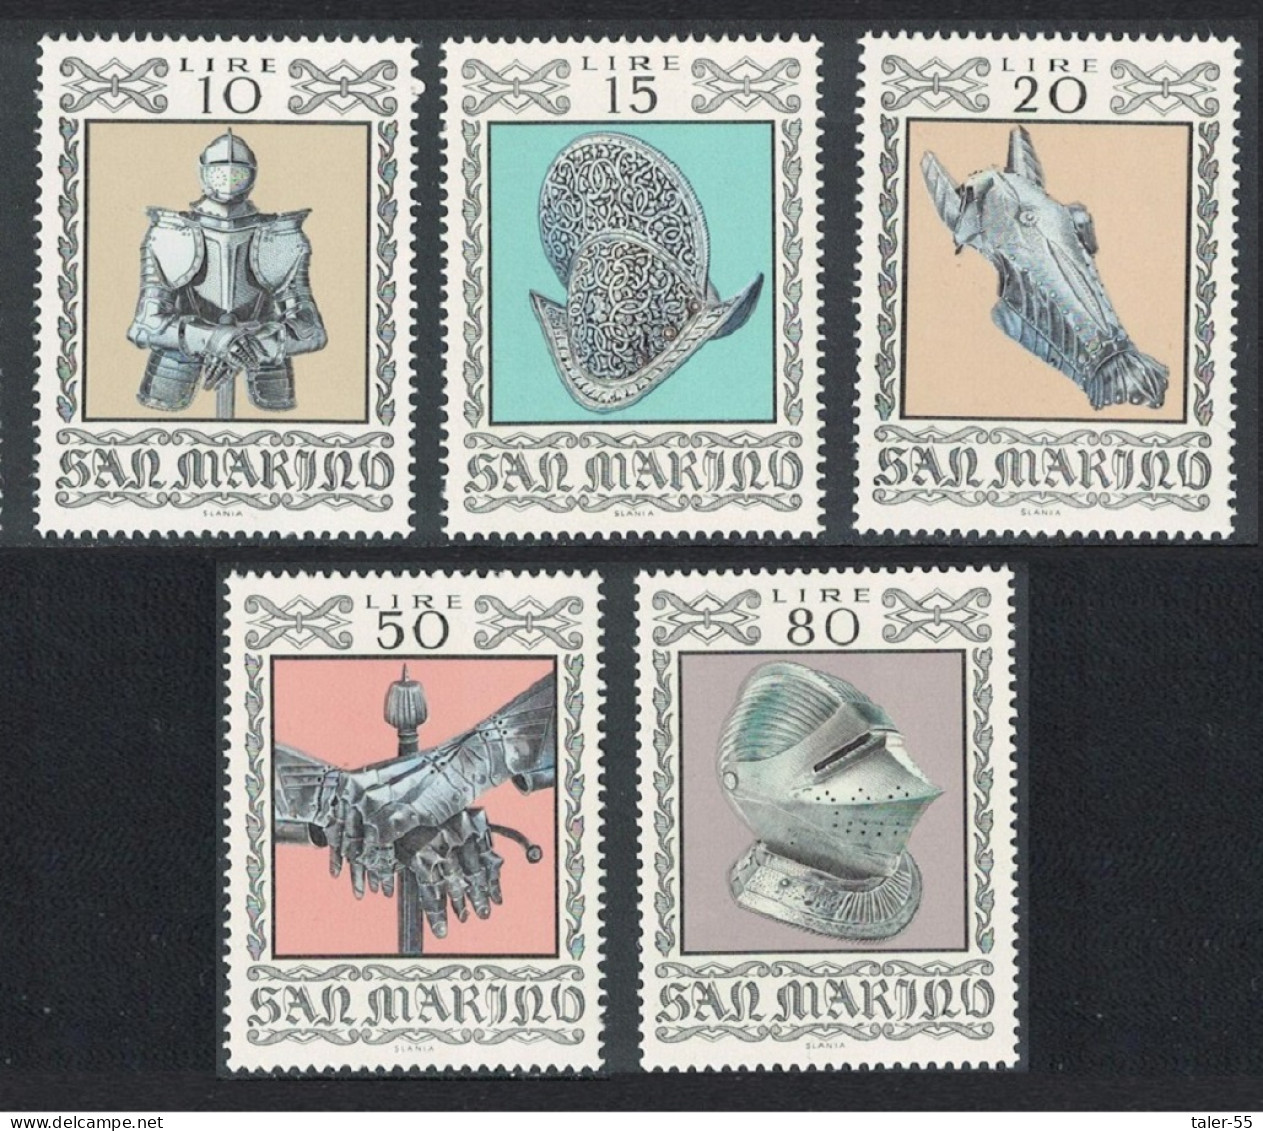 San Marino Ancient Weapons From 'Cesta' Museum San Marino 5v 1974 MNH SG#994=999 - Unused Stamps